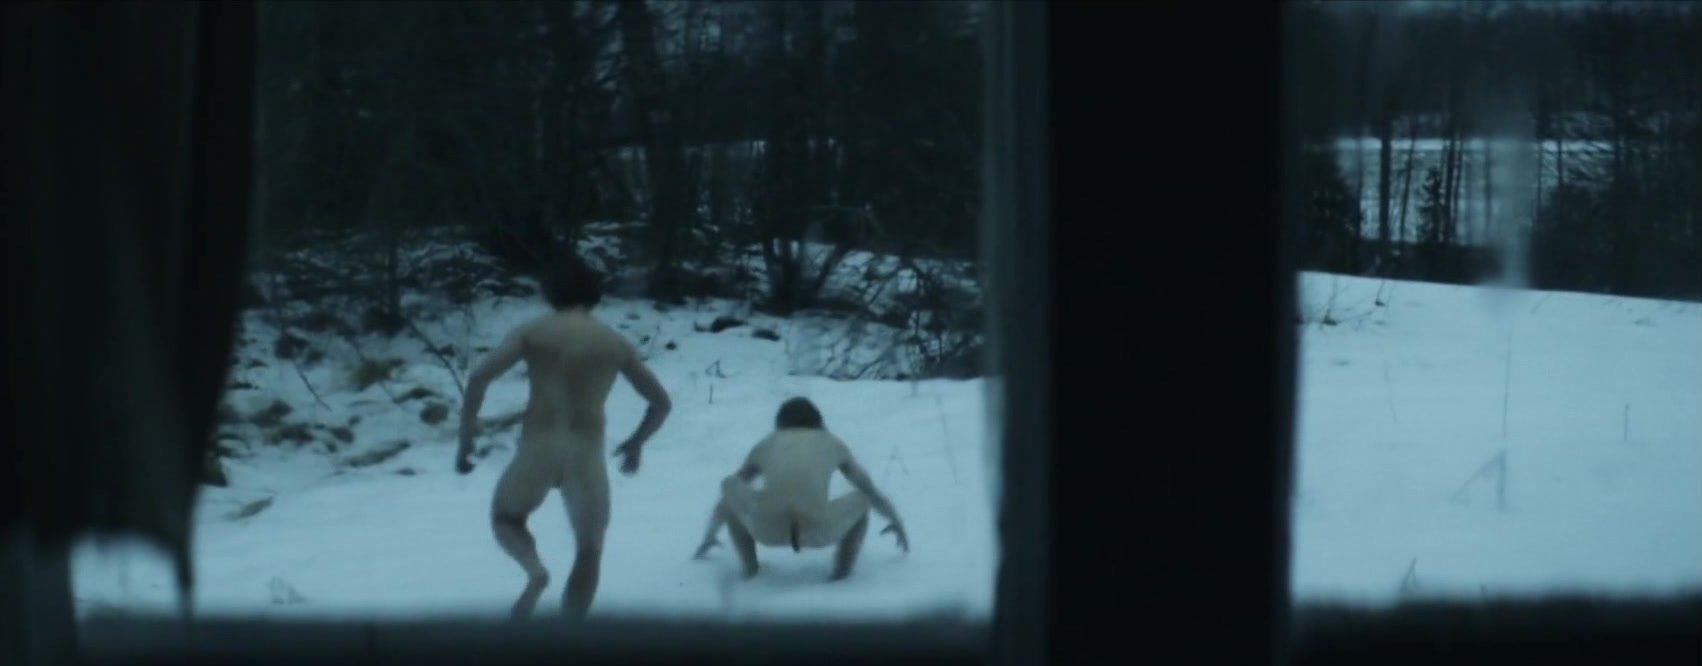 TWO MEN PLAY IN SNOW AFTER SAUNA